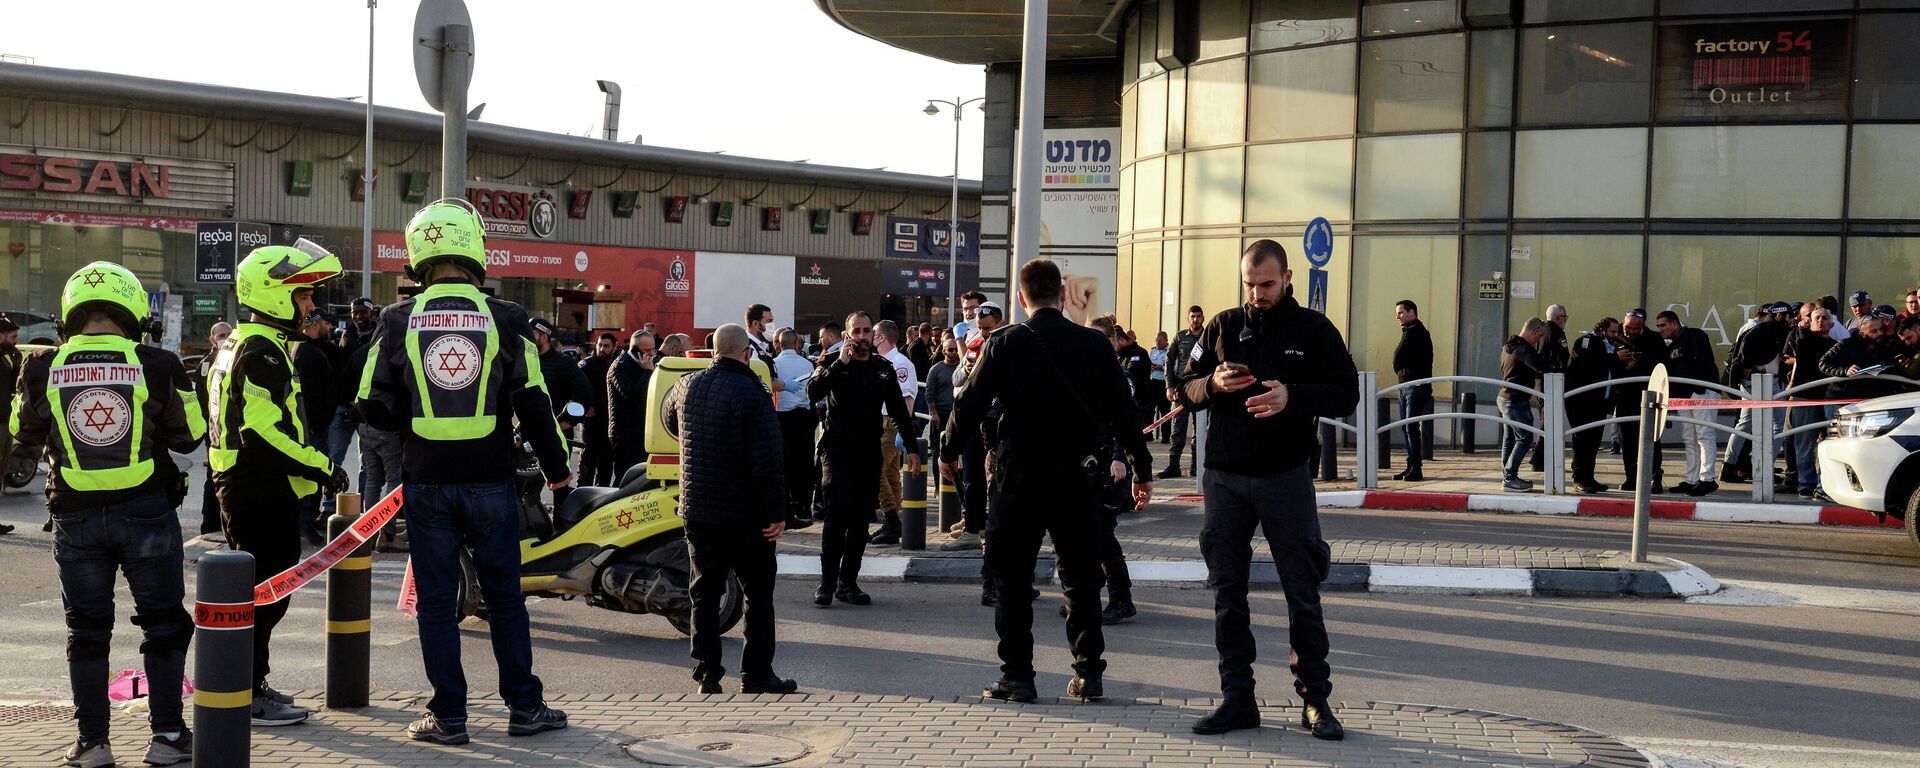 Israeli security and rescue forces secure the scene of an attack in which people were killed near a shopping centre in Beersheba, Israel, March 22, 2022 - Sputnik International, 1920, 23.03.2022